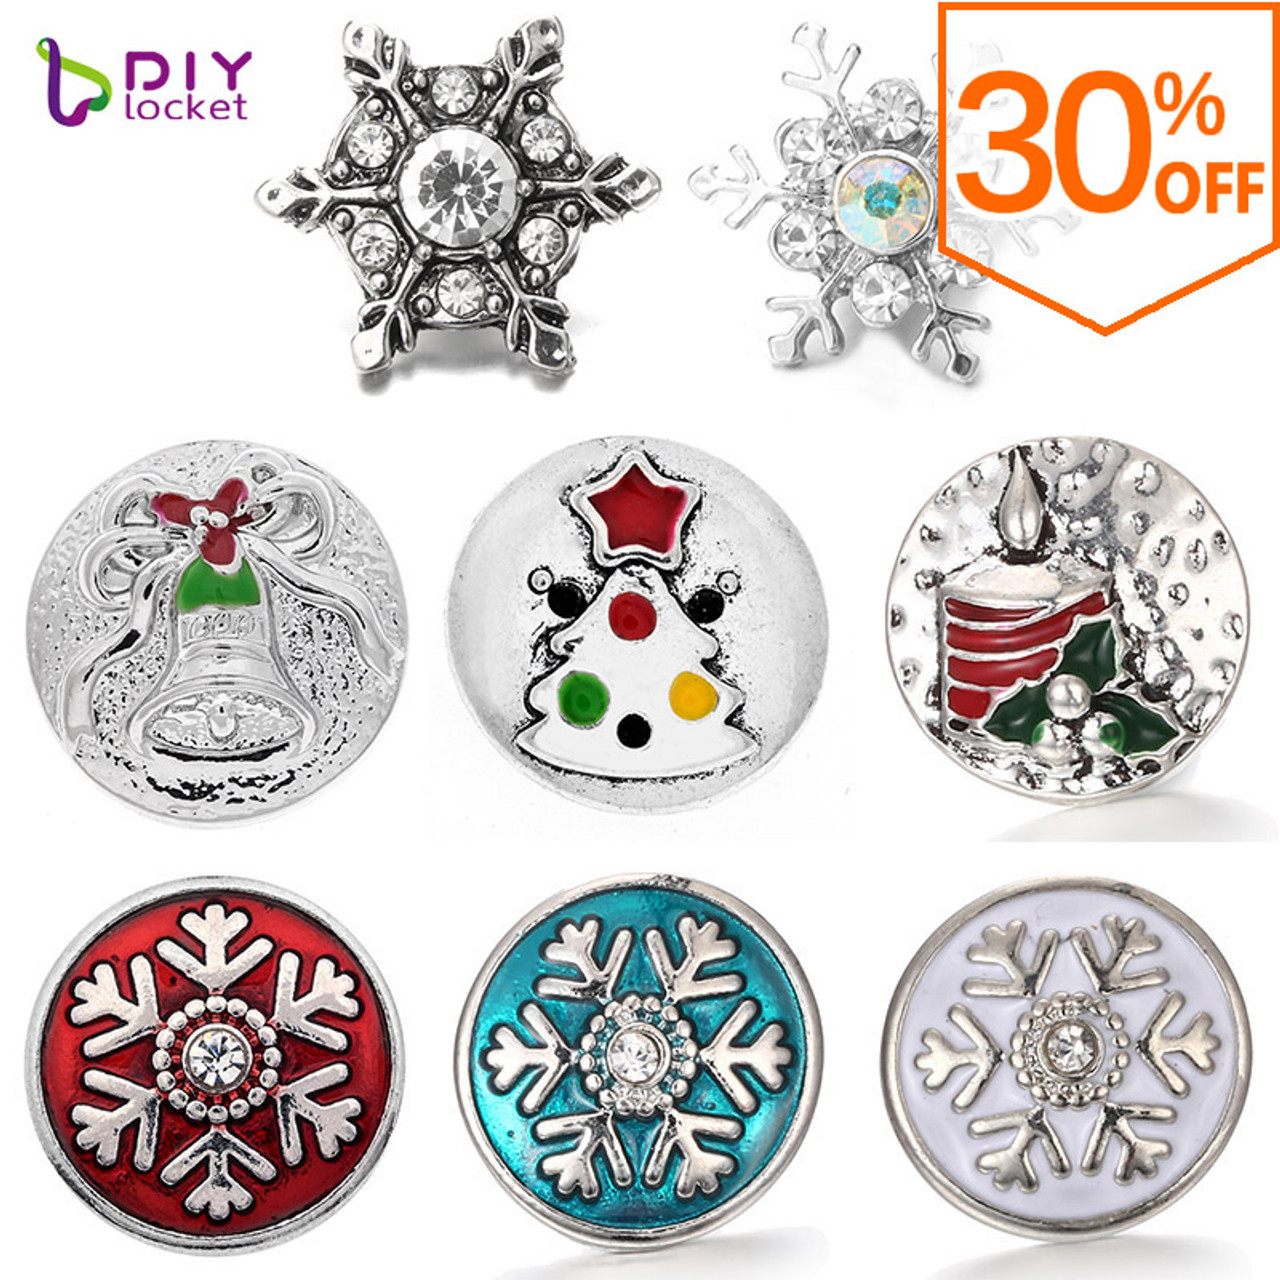 LKLDM 24PCS Mixed Style Rhinestones Snaps Jewelry Charms Ginger Buttons  18/20mm for Interchangeable Snaps Jewelry Making Women Teens Girls DIY  Bracelets Necklaces Rings Brooch Accessories LNNZ24-059 – Gingersnapscharms